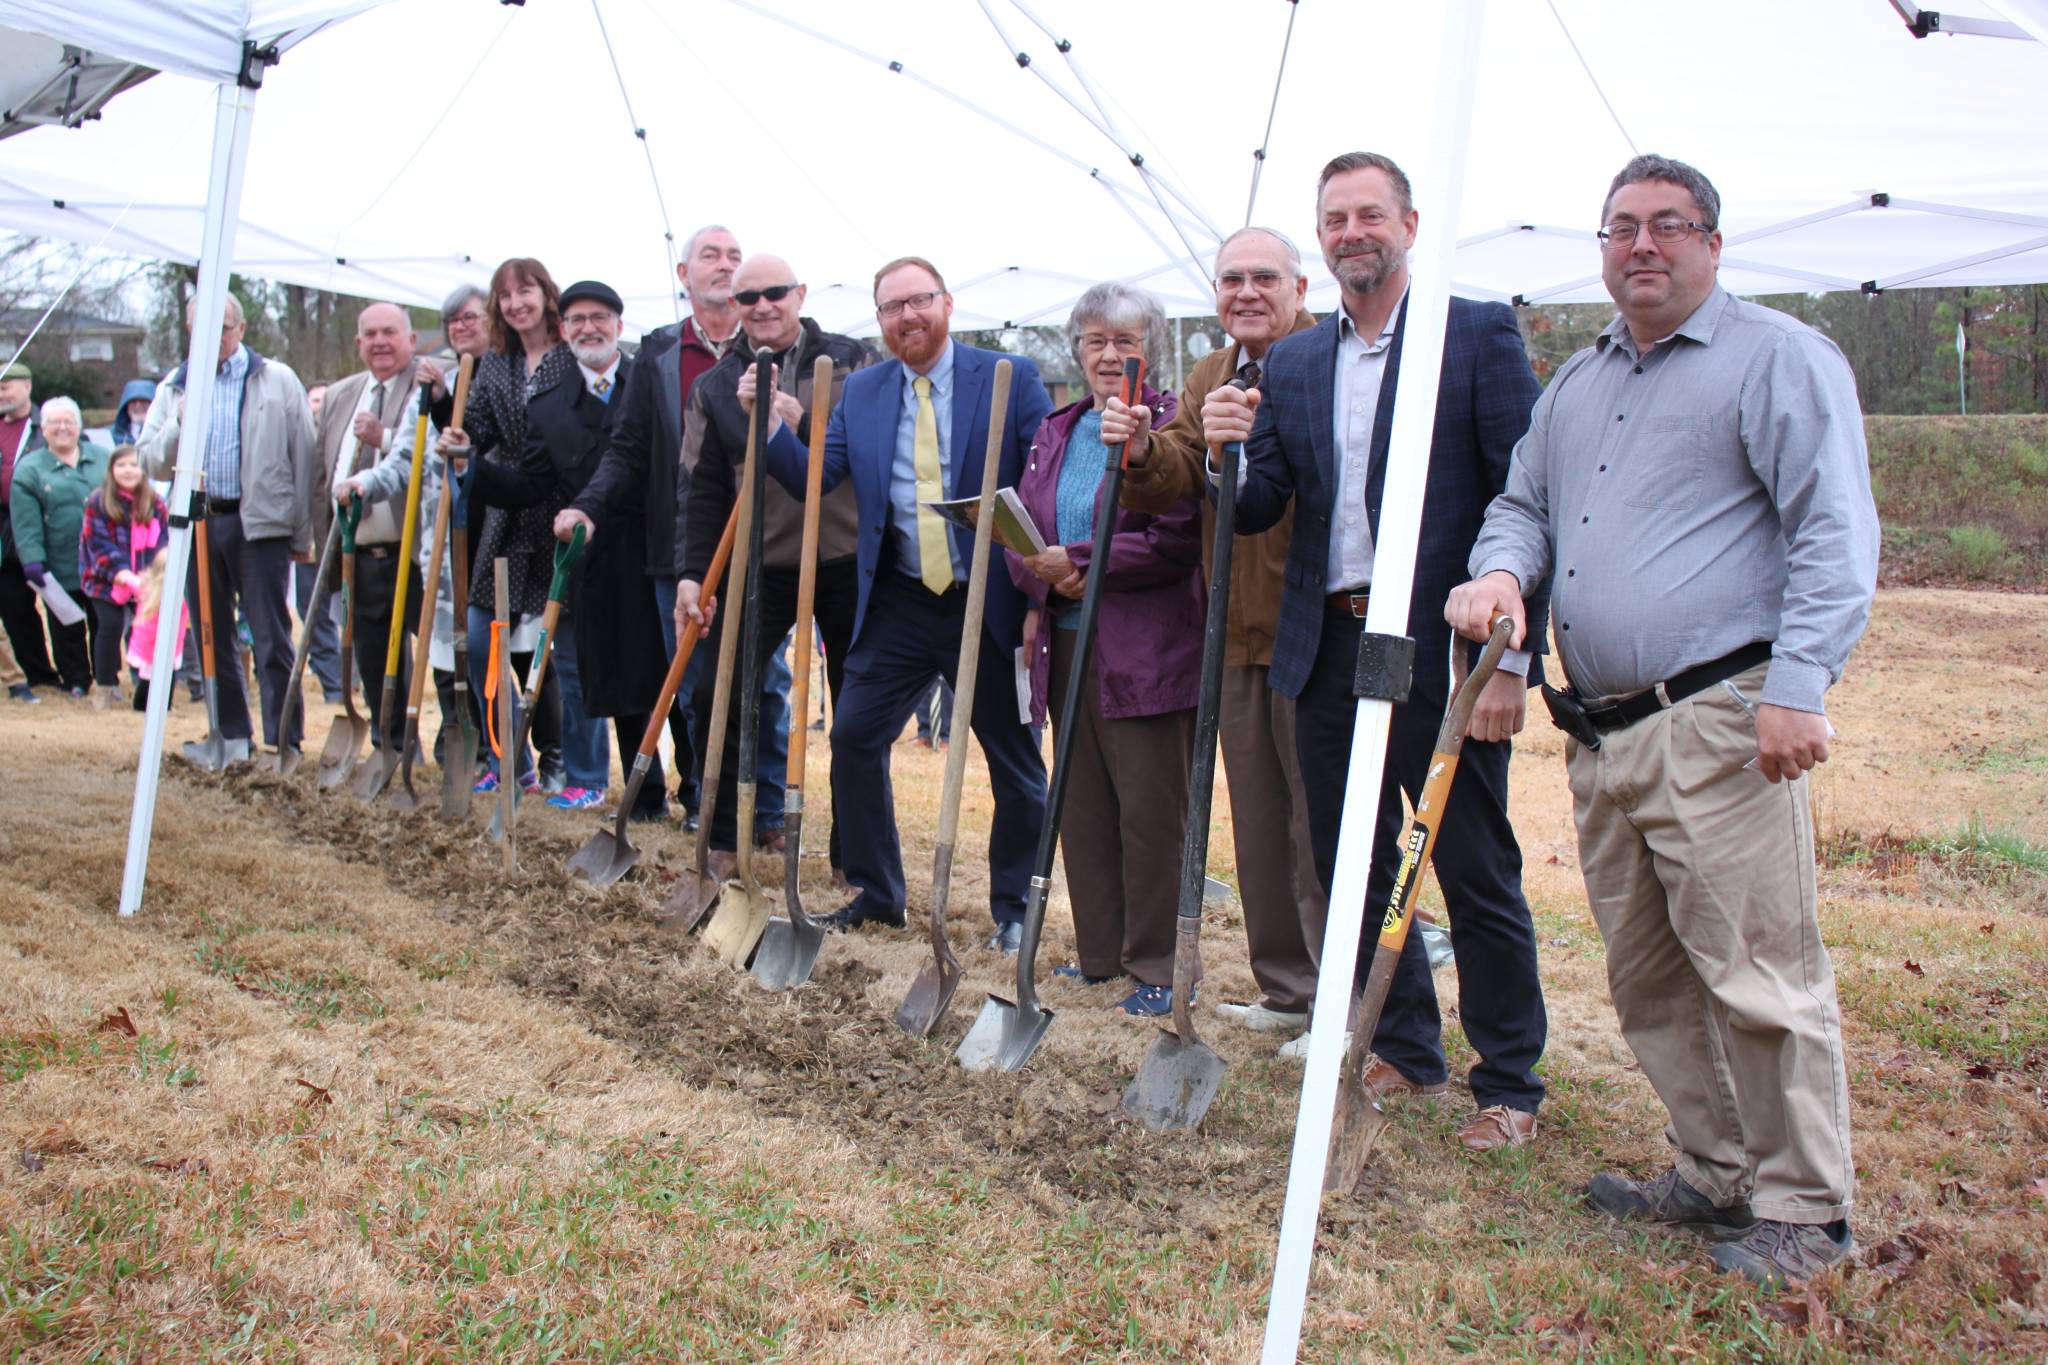 People holding shovels standing under a tent at a groundbreaking ceremony